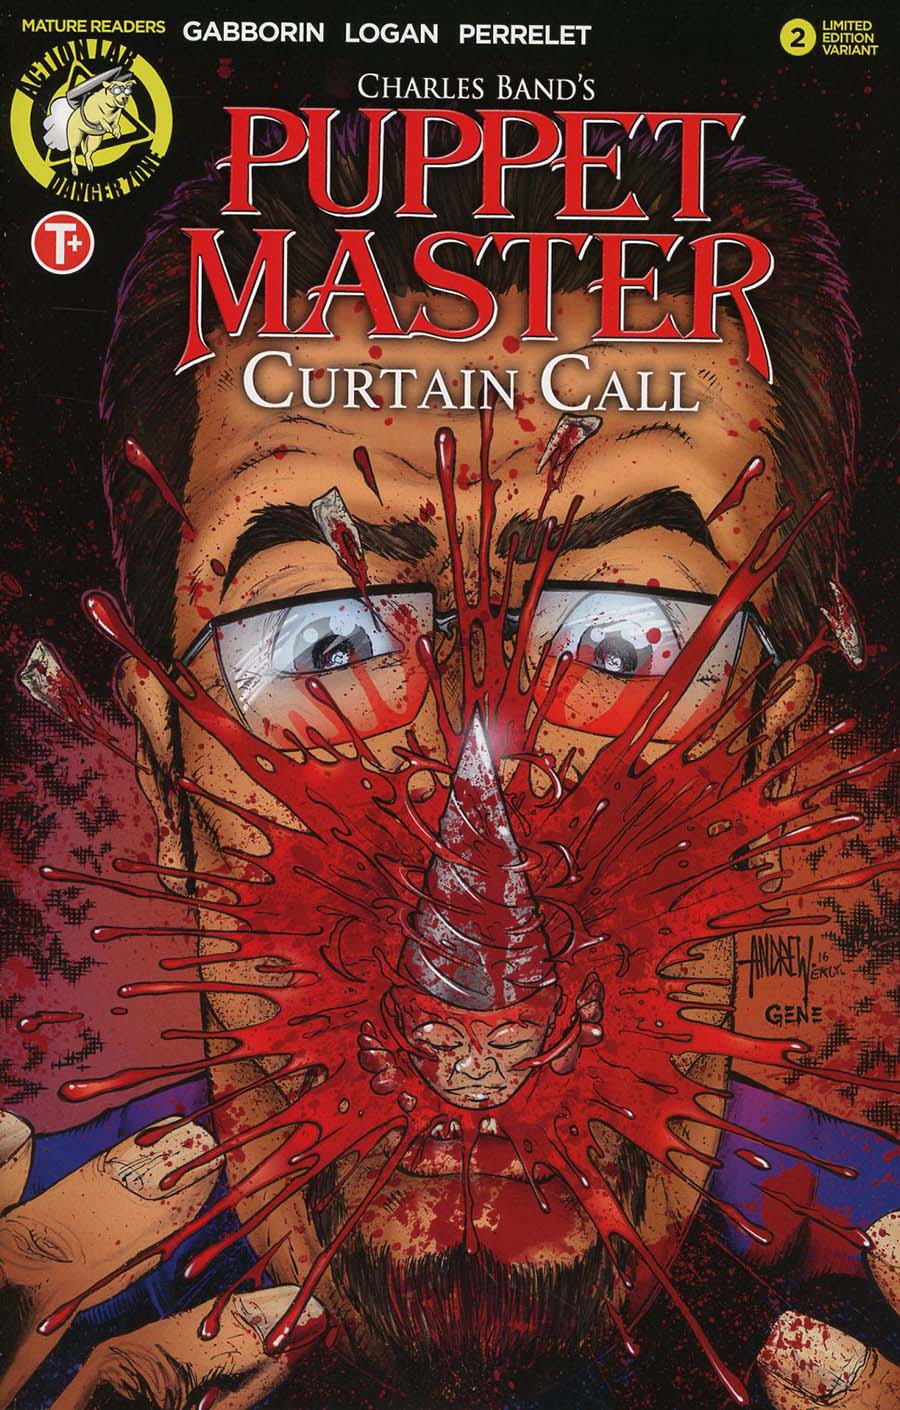 Puppet Master Curtain Call #2 Cover C Variant Andrew Mangum Kill Cover